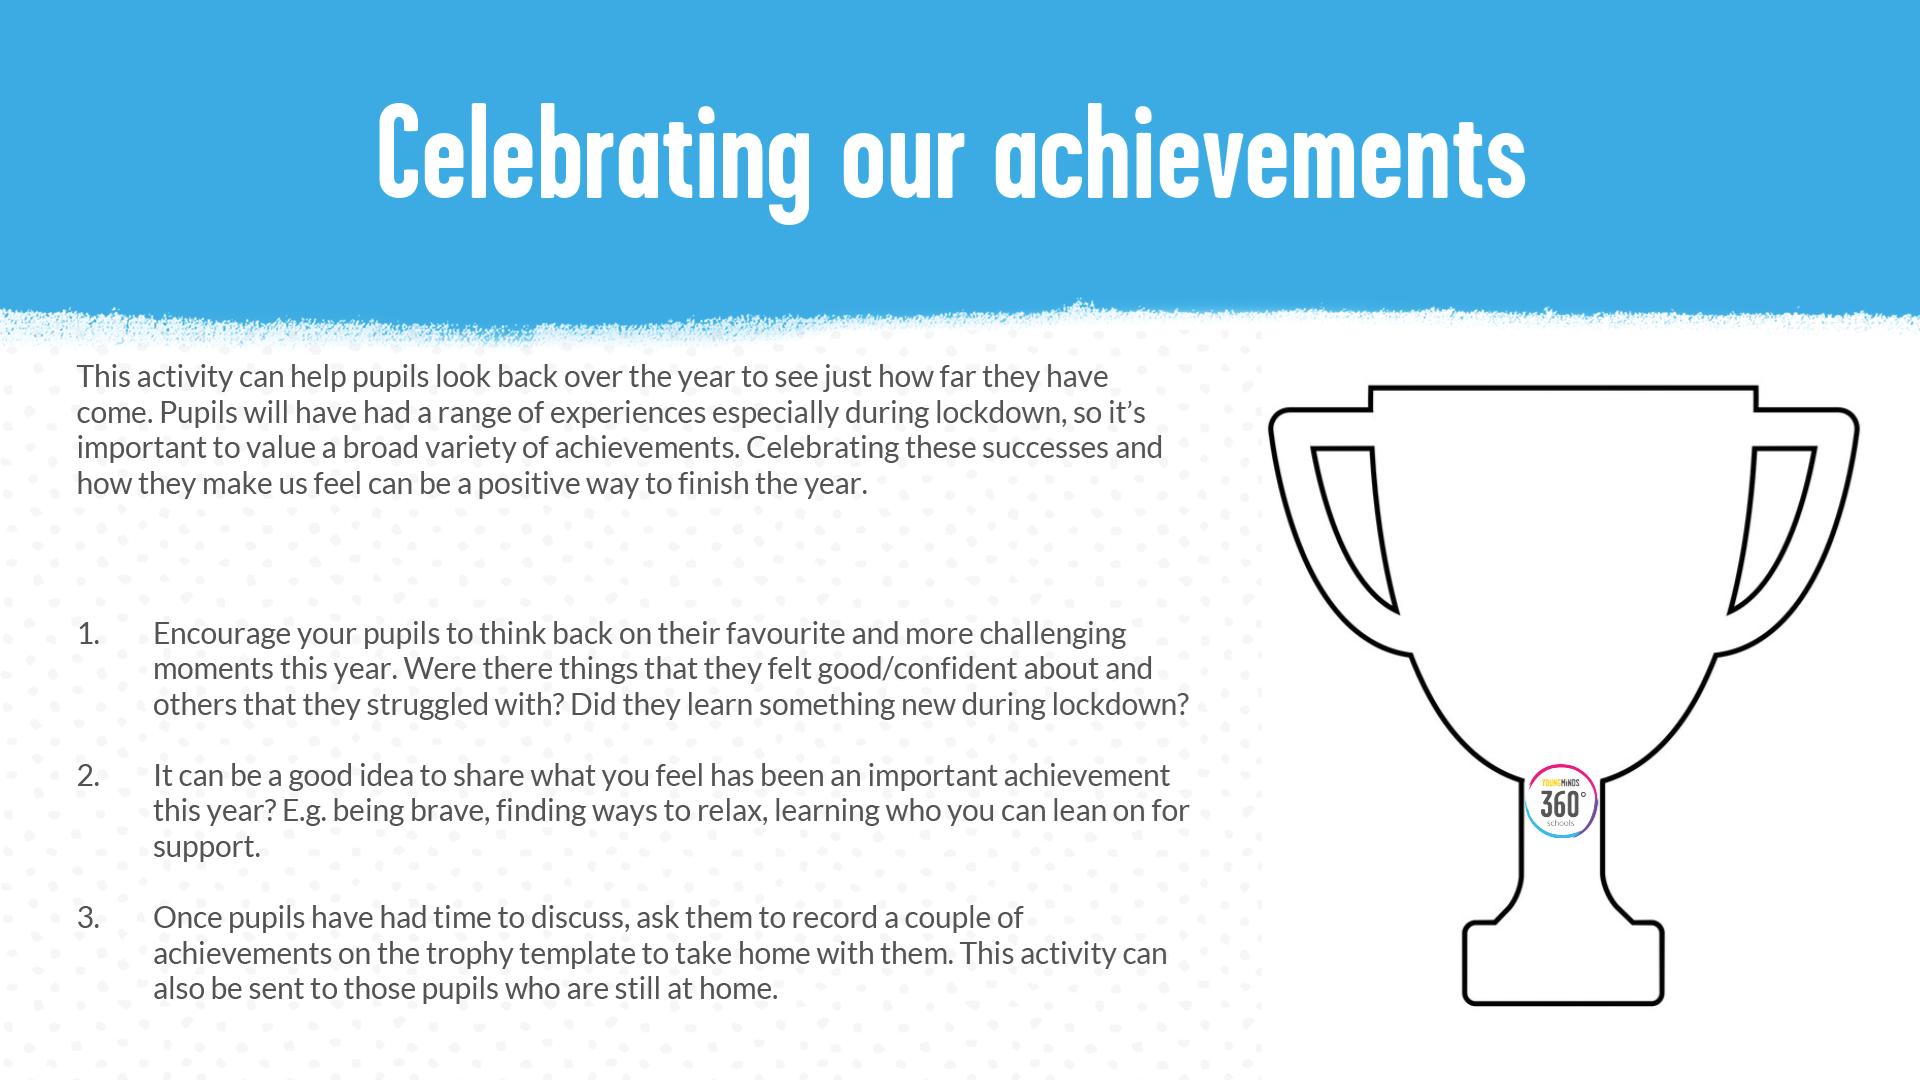 An image of our 'Celebrating our achievements' poster. On the right hand side of the poster is the outline of a trophy.